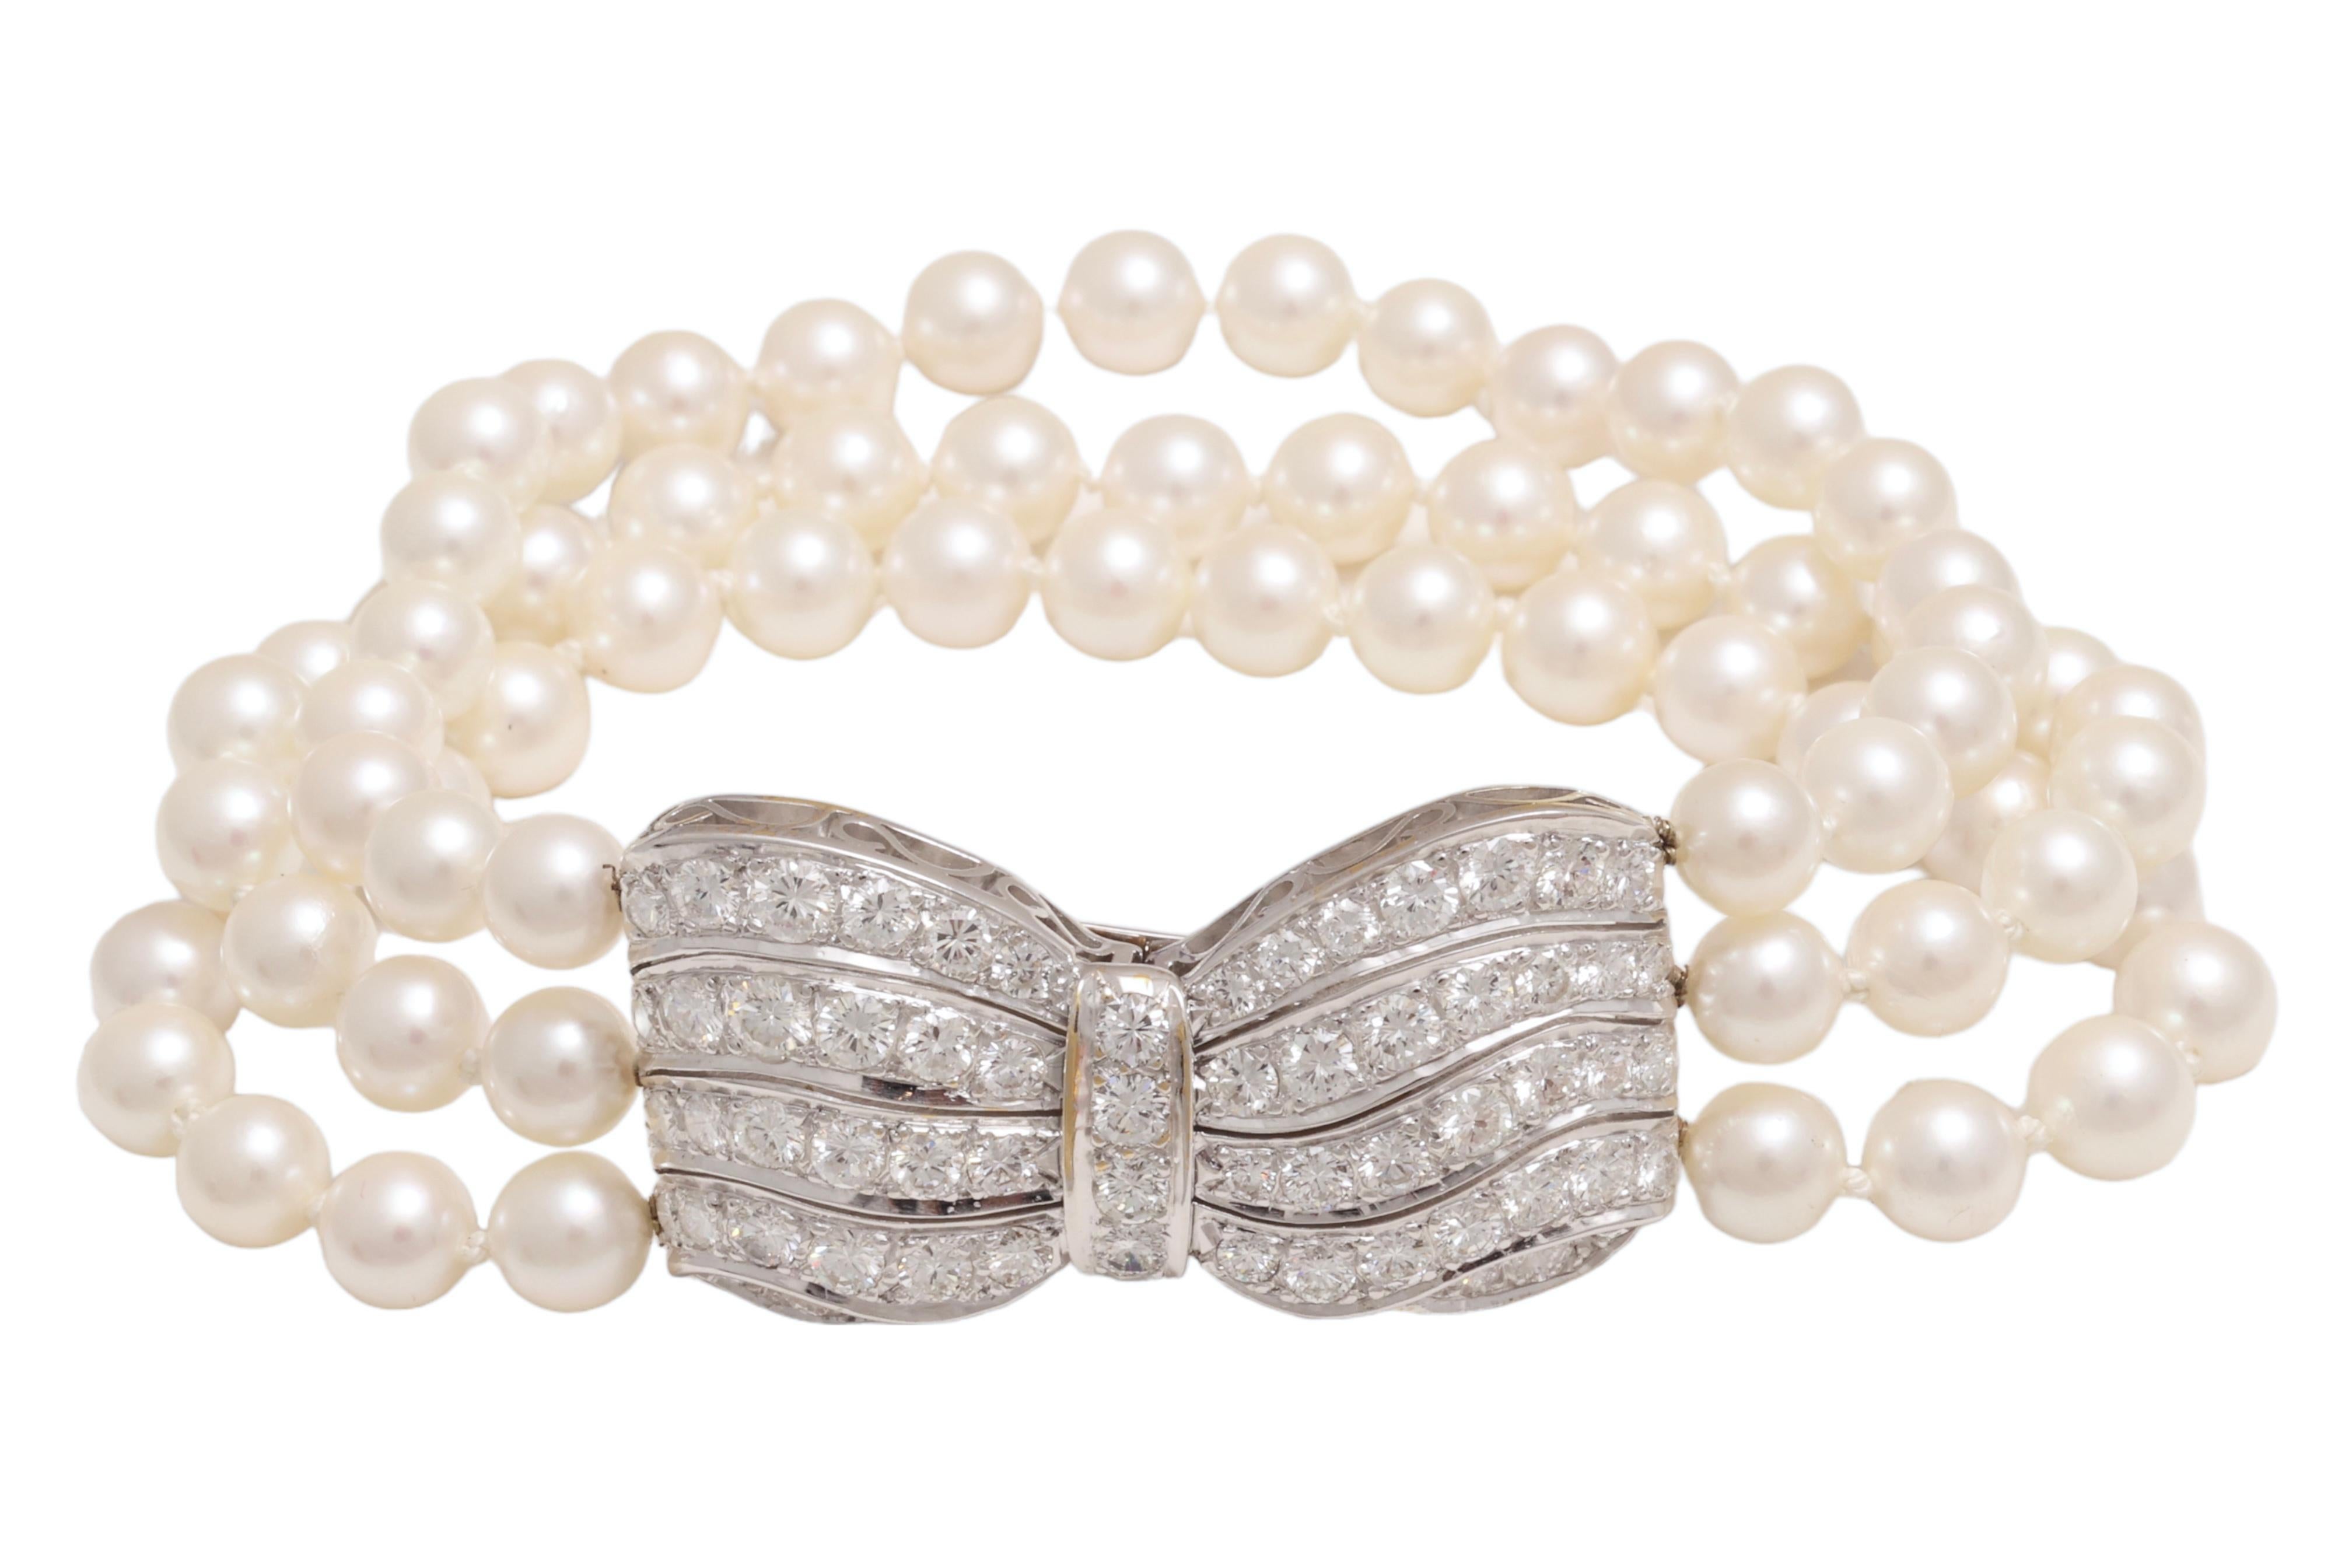 Elegant and Feminine 18 kt. White Gold Akoya Pearl Bracelet with 6.52 ct. Diamonds

Diamonds: Brilliant cut diamonds together approx. 6.52 ct.

Pearls: 3 rows of Japanese Akoya pearls 23 pearls / row

Material: 18 kt. white gold

Measurements: